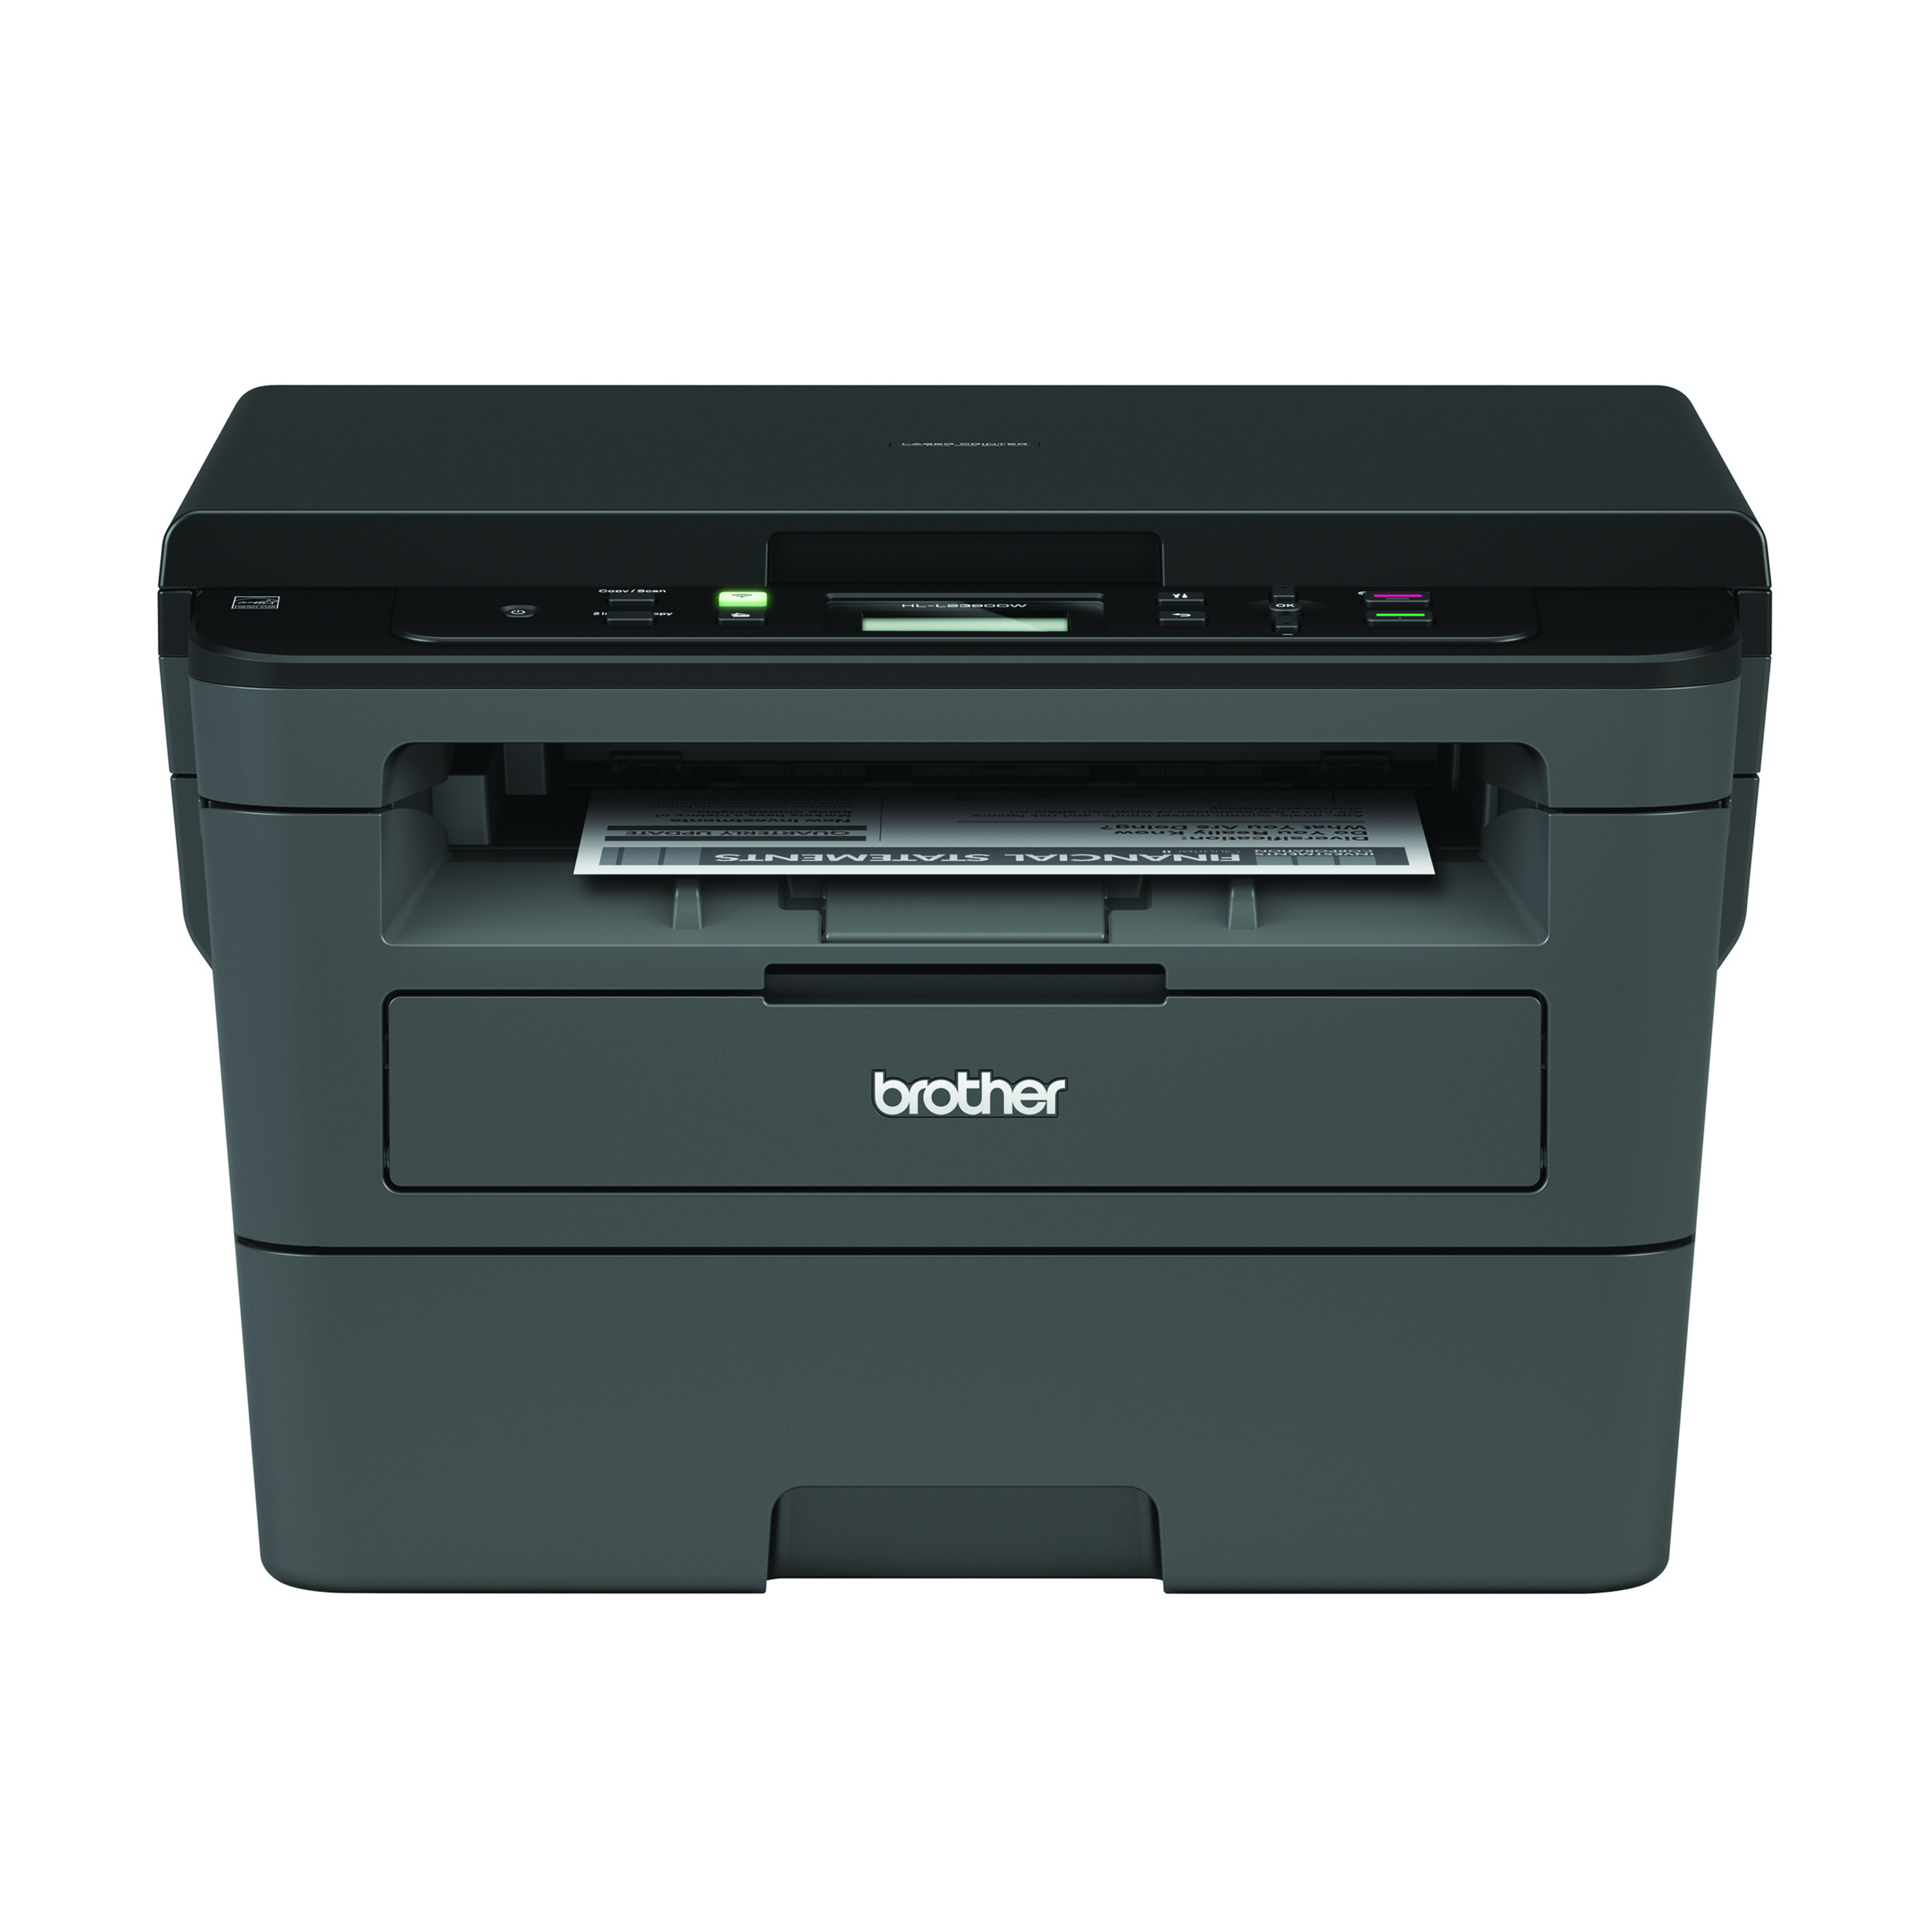 Brother MFC-L2750DW Wireless Black & White All-In-One Laser Printer,  Refresh Subscription Eligible